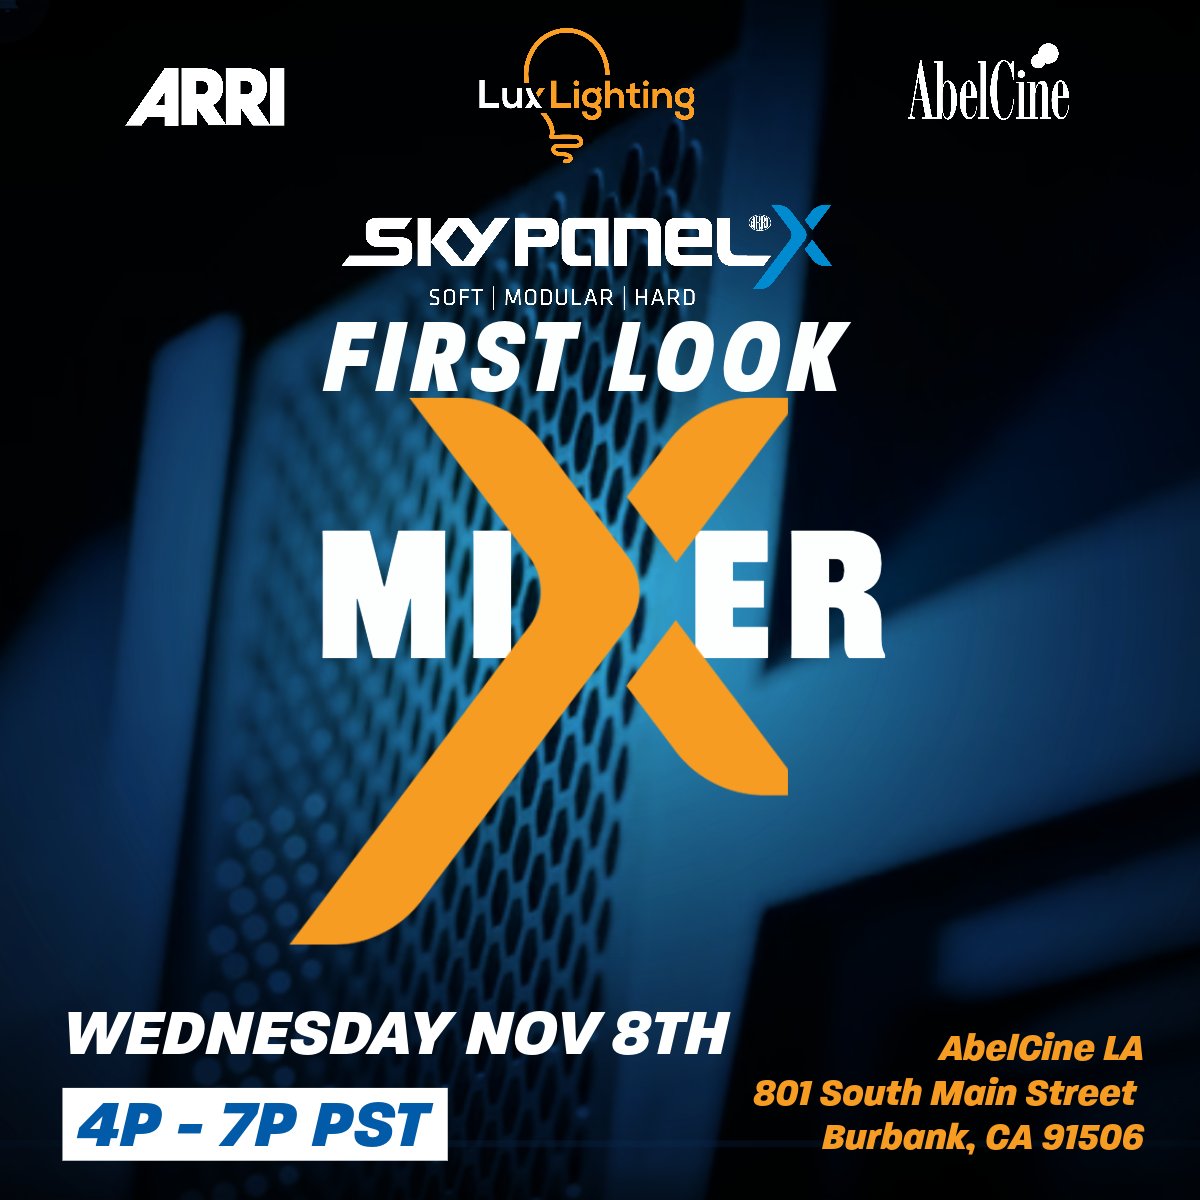 If you happen to be in L.A. we're having a miXer for the SkypanelX. RSVP for your spot to get your first look on EventBrite. See you Wednesday, Nov. 8! RSVP: ow.ly/wQOH50Q1GP6